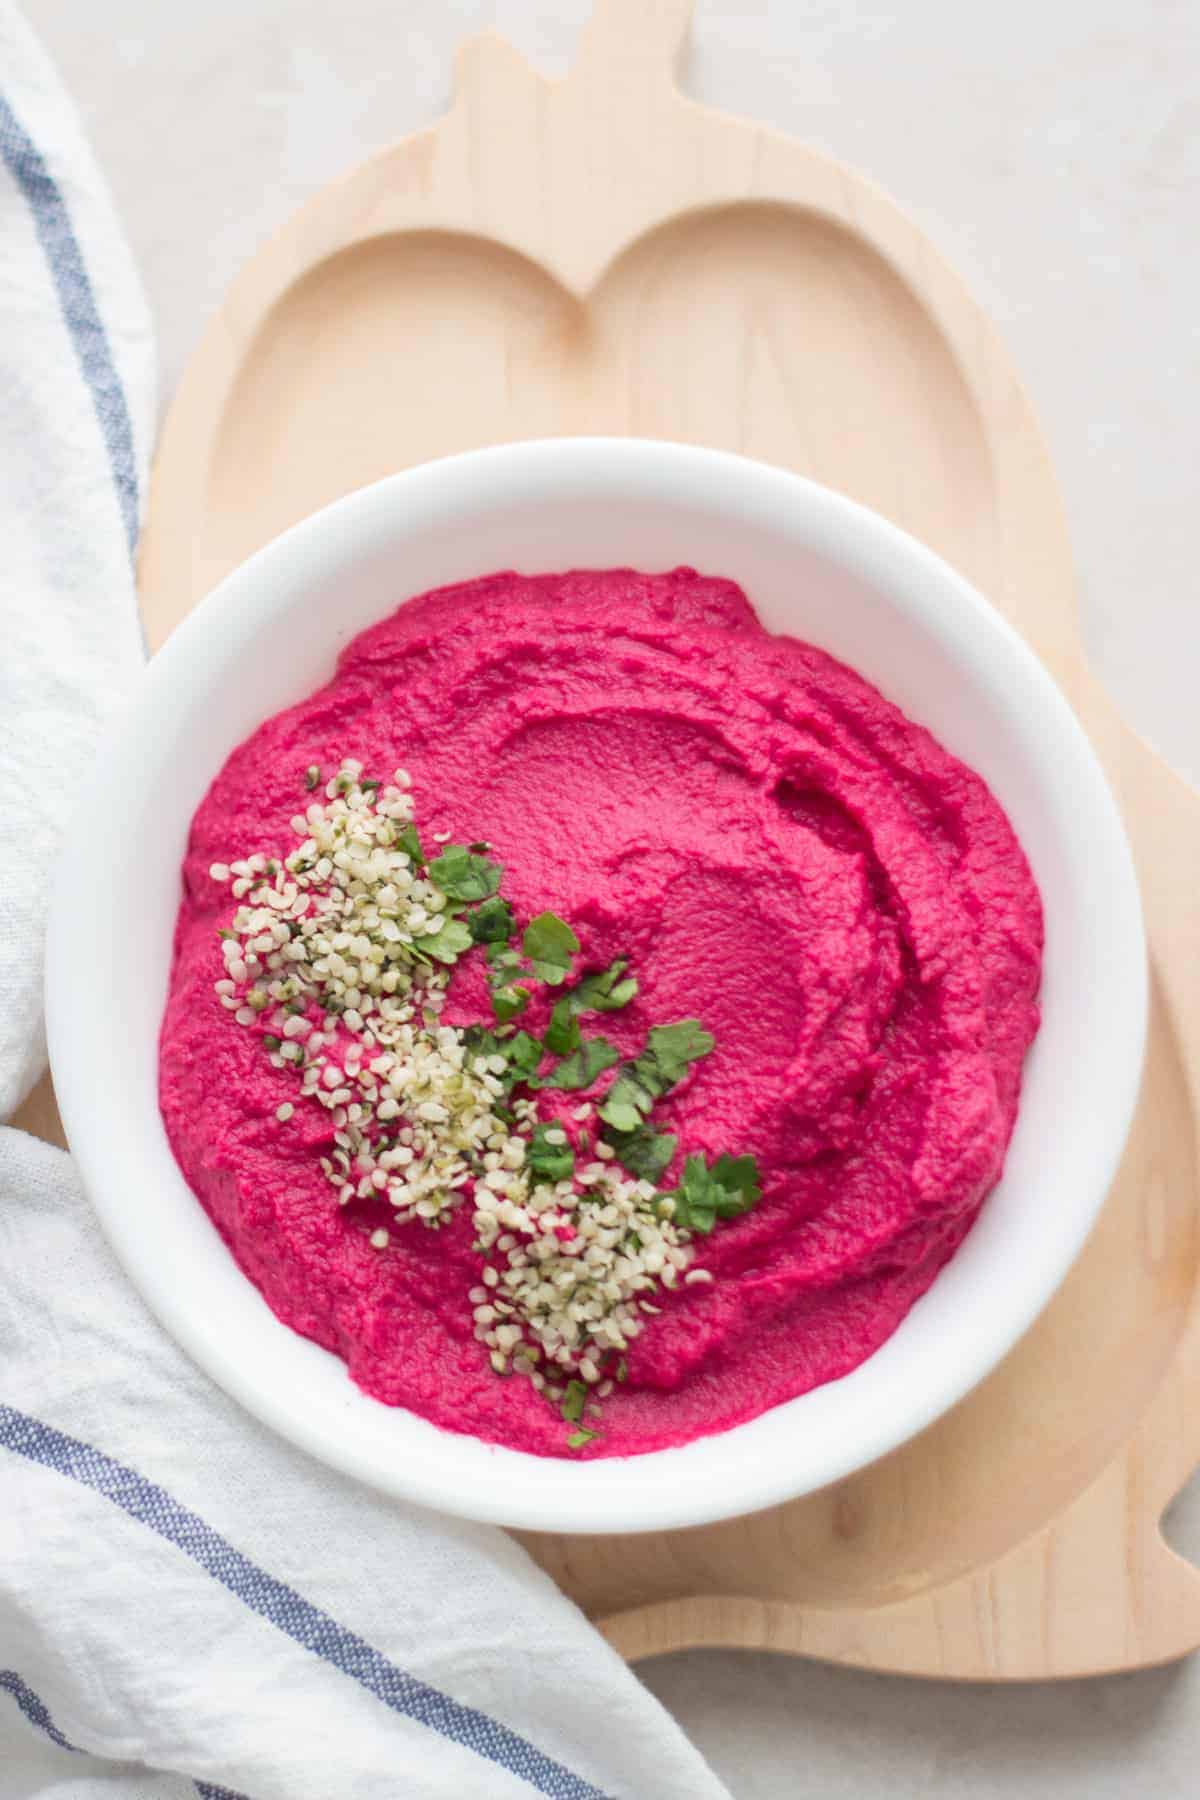 beet hummus in a white bowl with hemp seeds and cilantro sprinkled on the left side